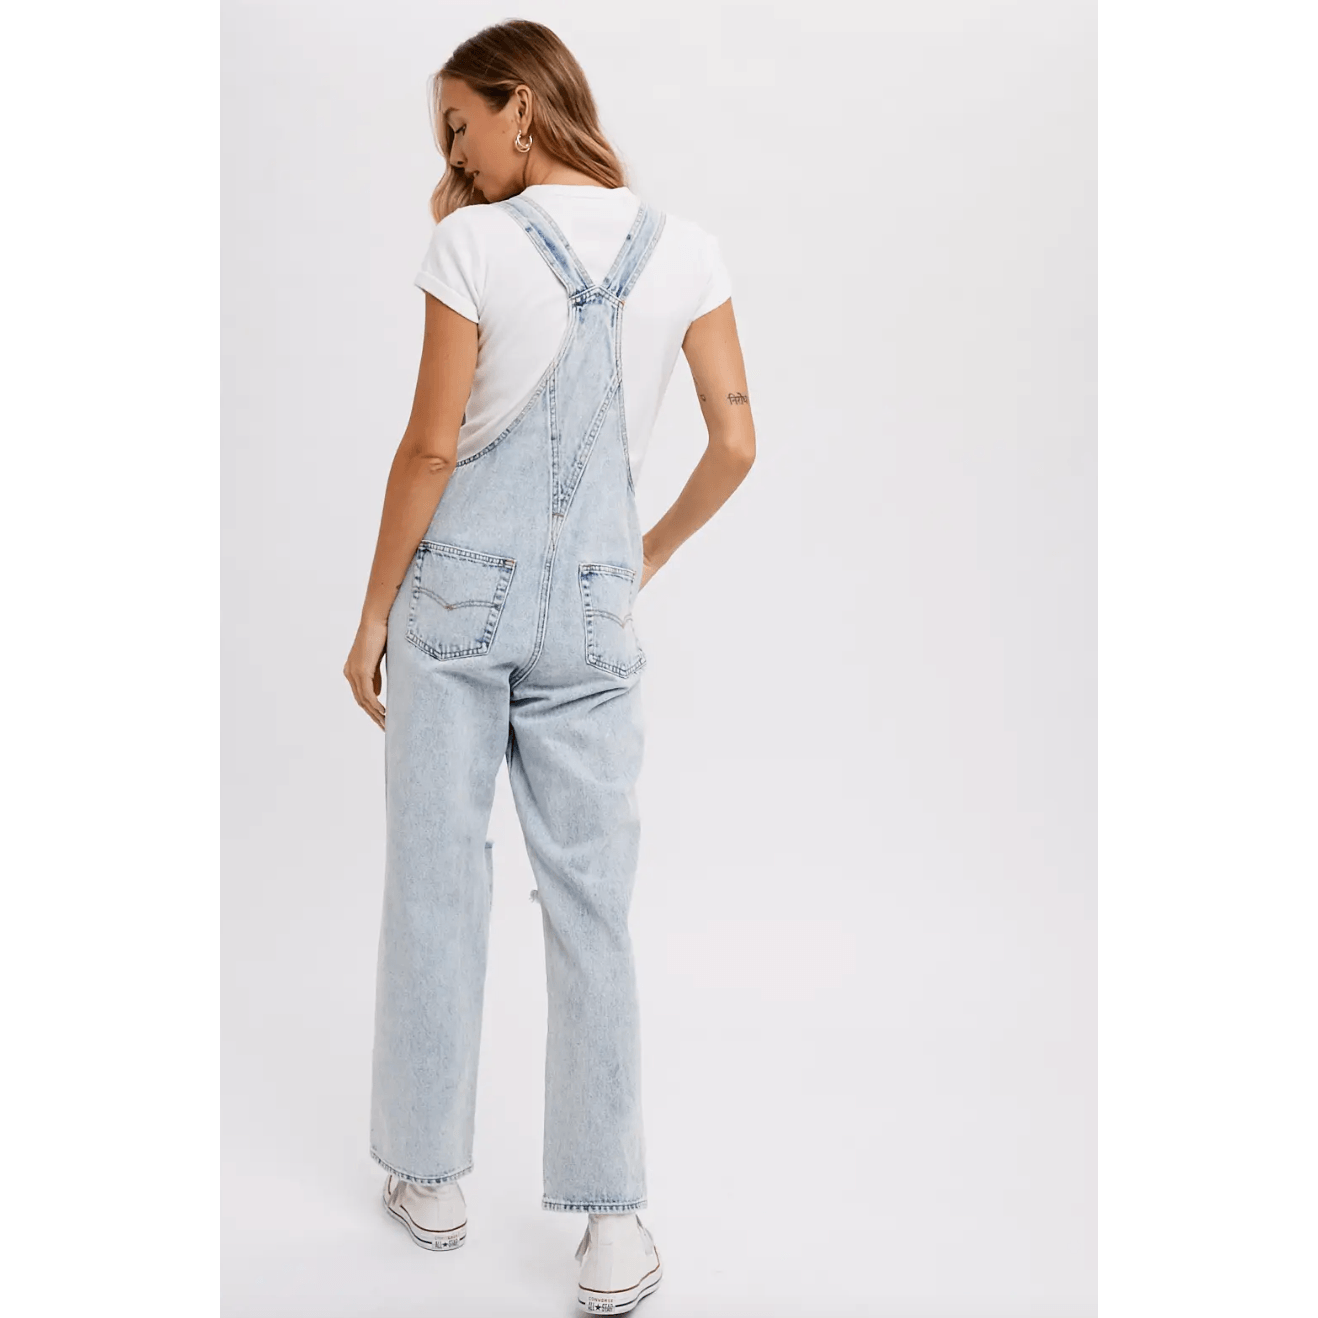 Ripped Knee Denim Overalls - Intrigue Ink Visit Bozeman, Unique Shopping Boutique in Montana, Work from Home Clothes for Women